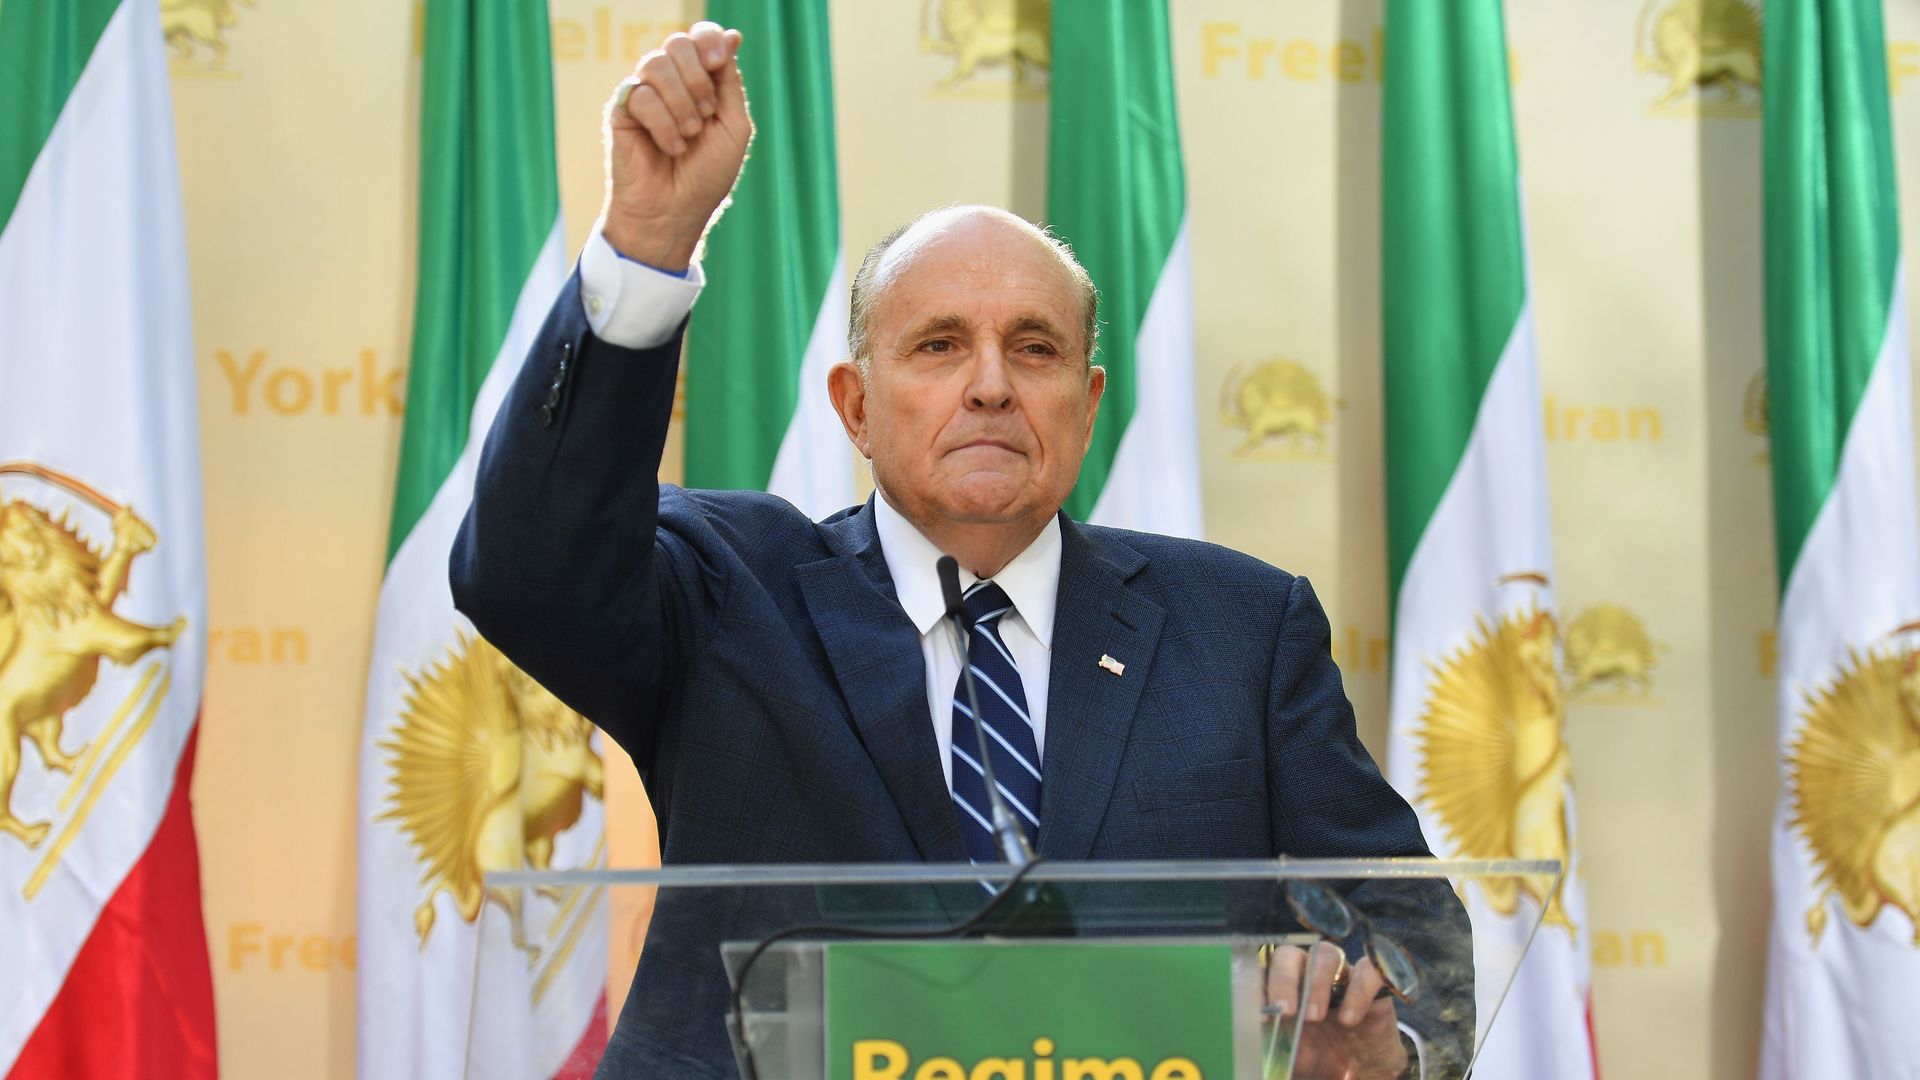 Rudy Giuliani, Former Mayor of New York City speaks to the Organization of Iranian American Communities outside the United Nations Headquarters in New York on September 24